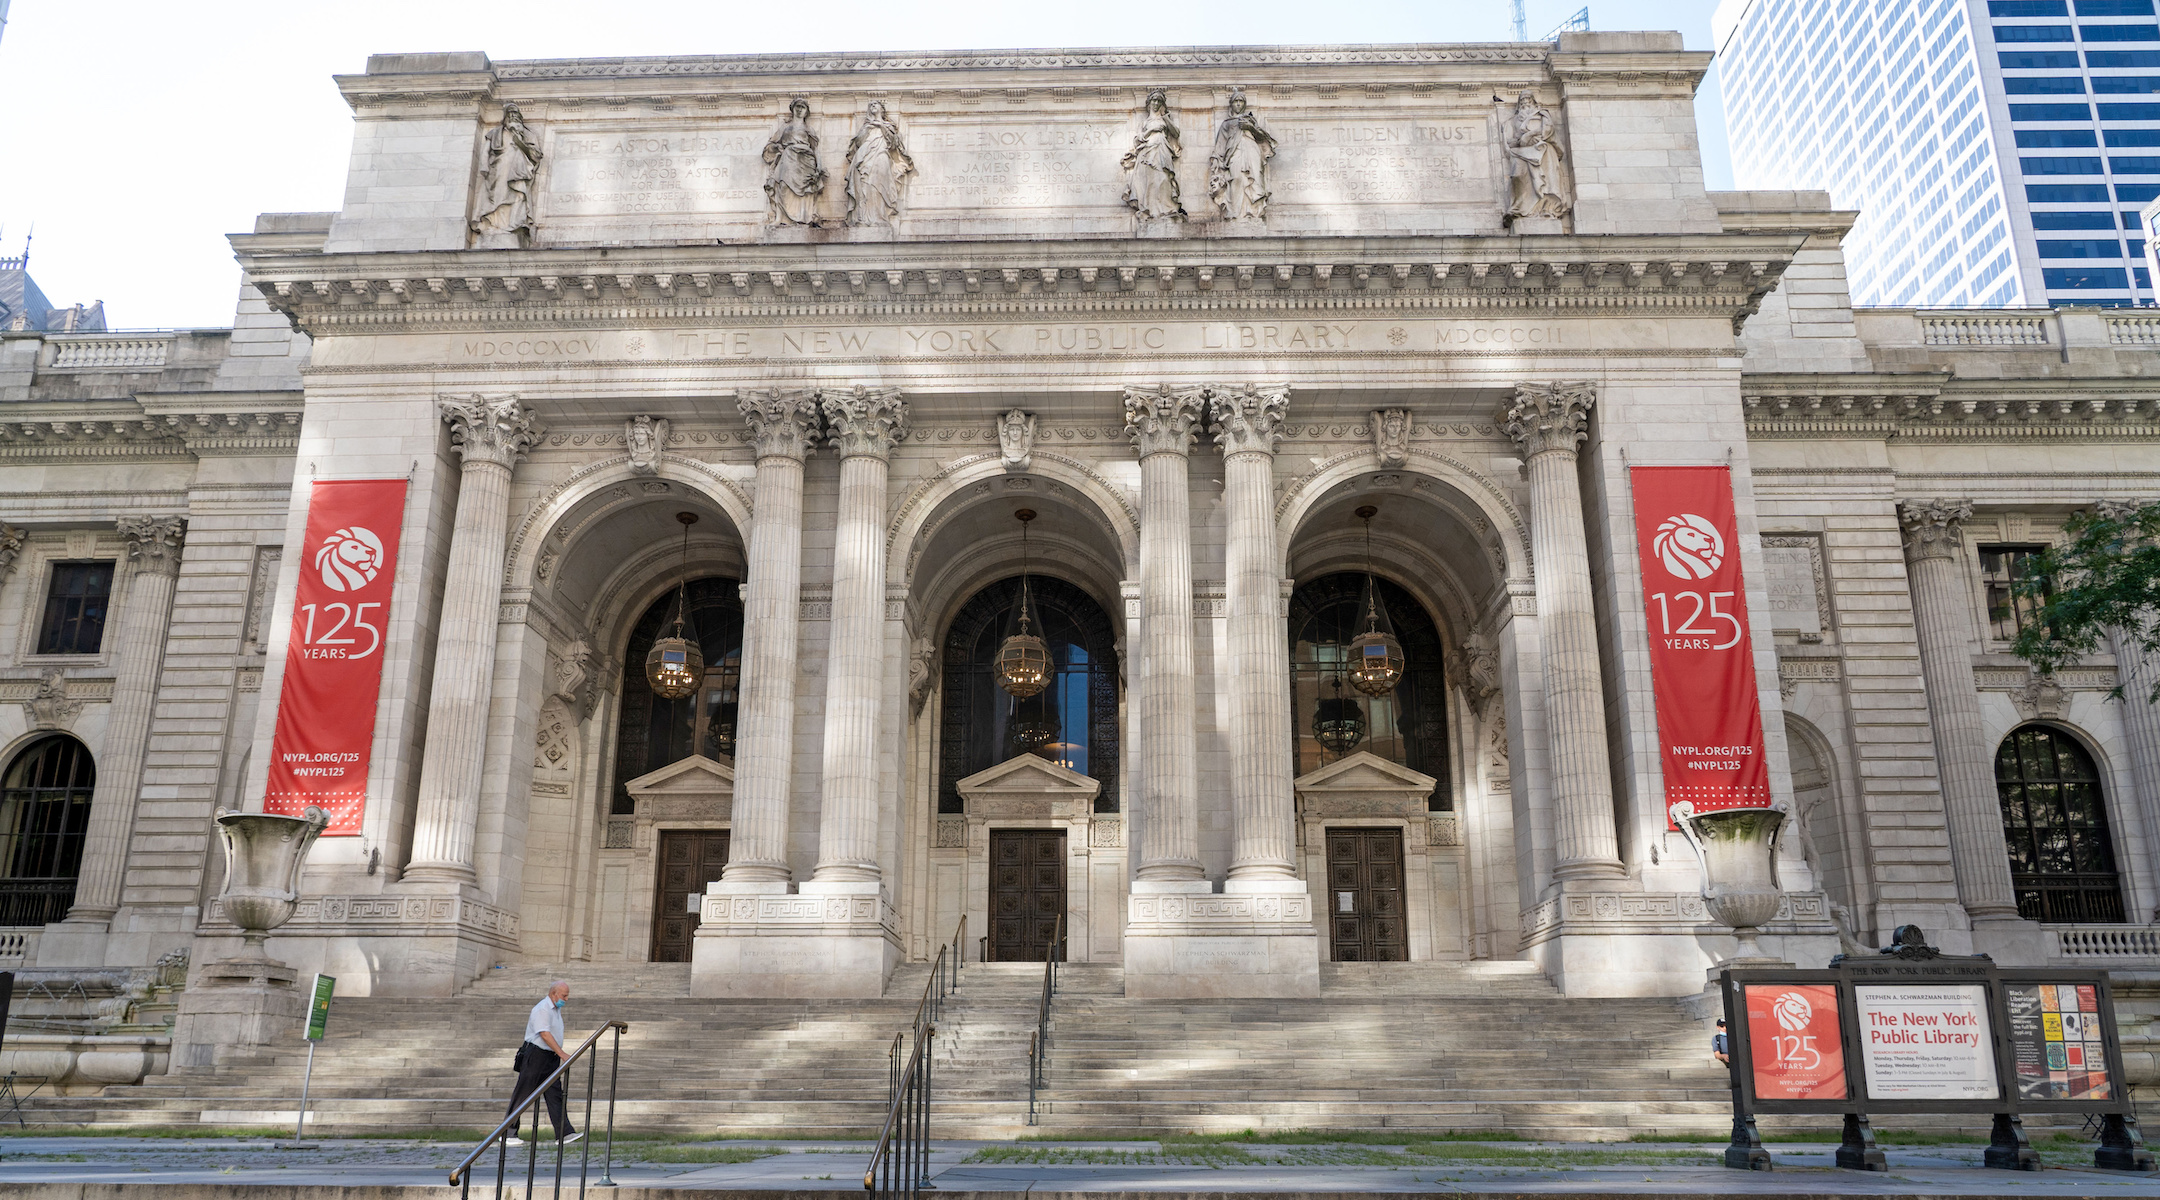 An exterior view of New York Public Library on Fifth Ave. in New York. (Ron Adar/SOPA Images/LightRocket via Getty Images)